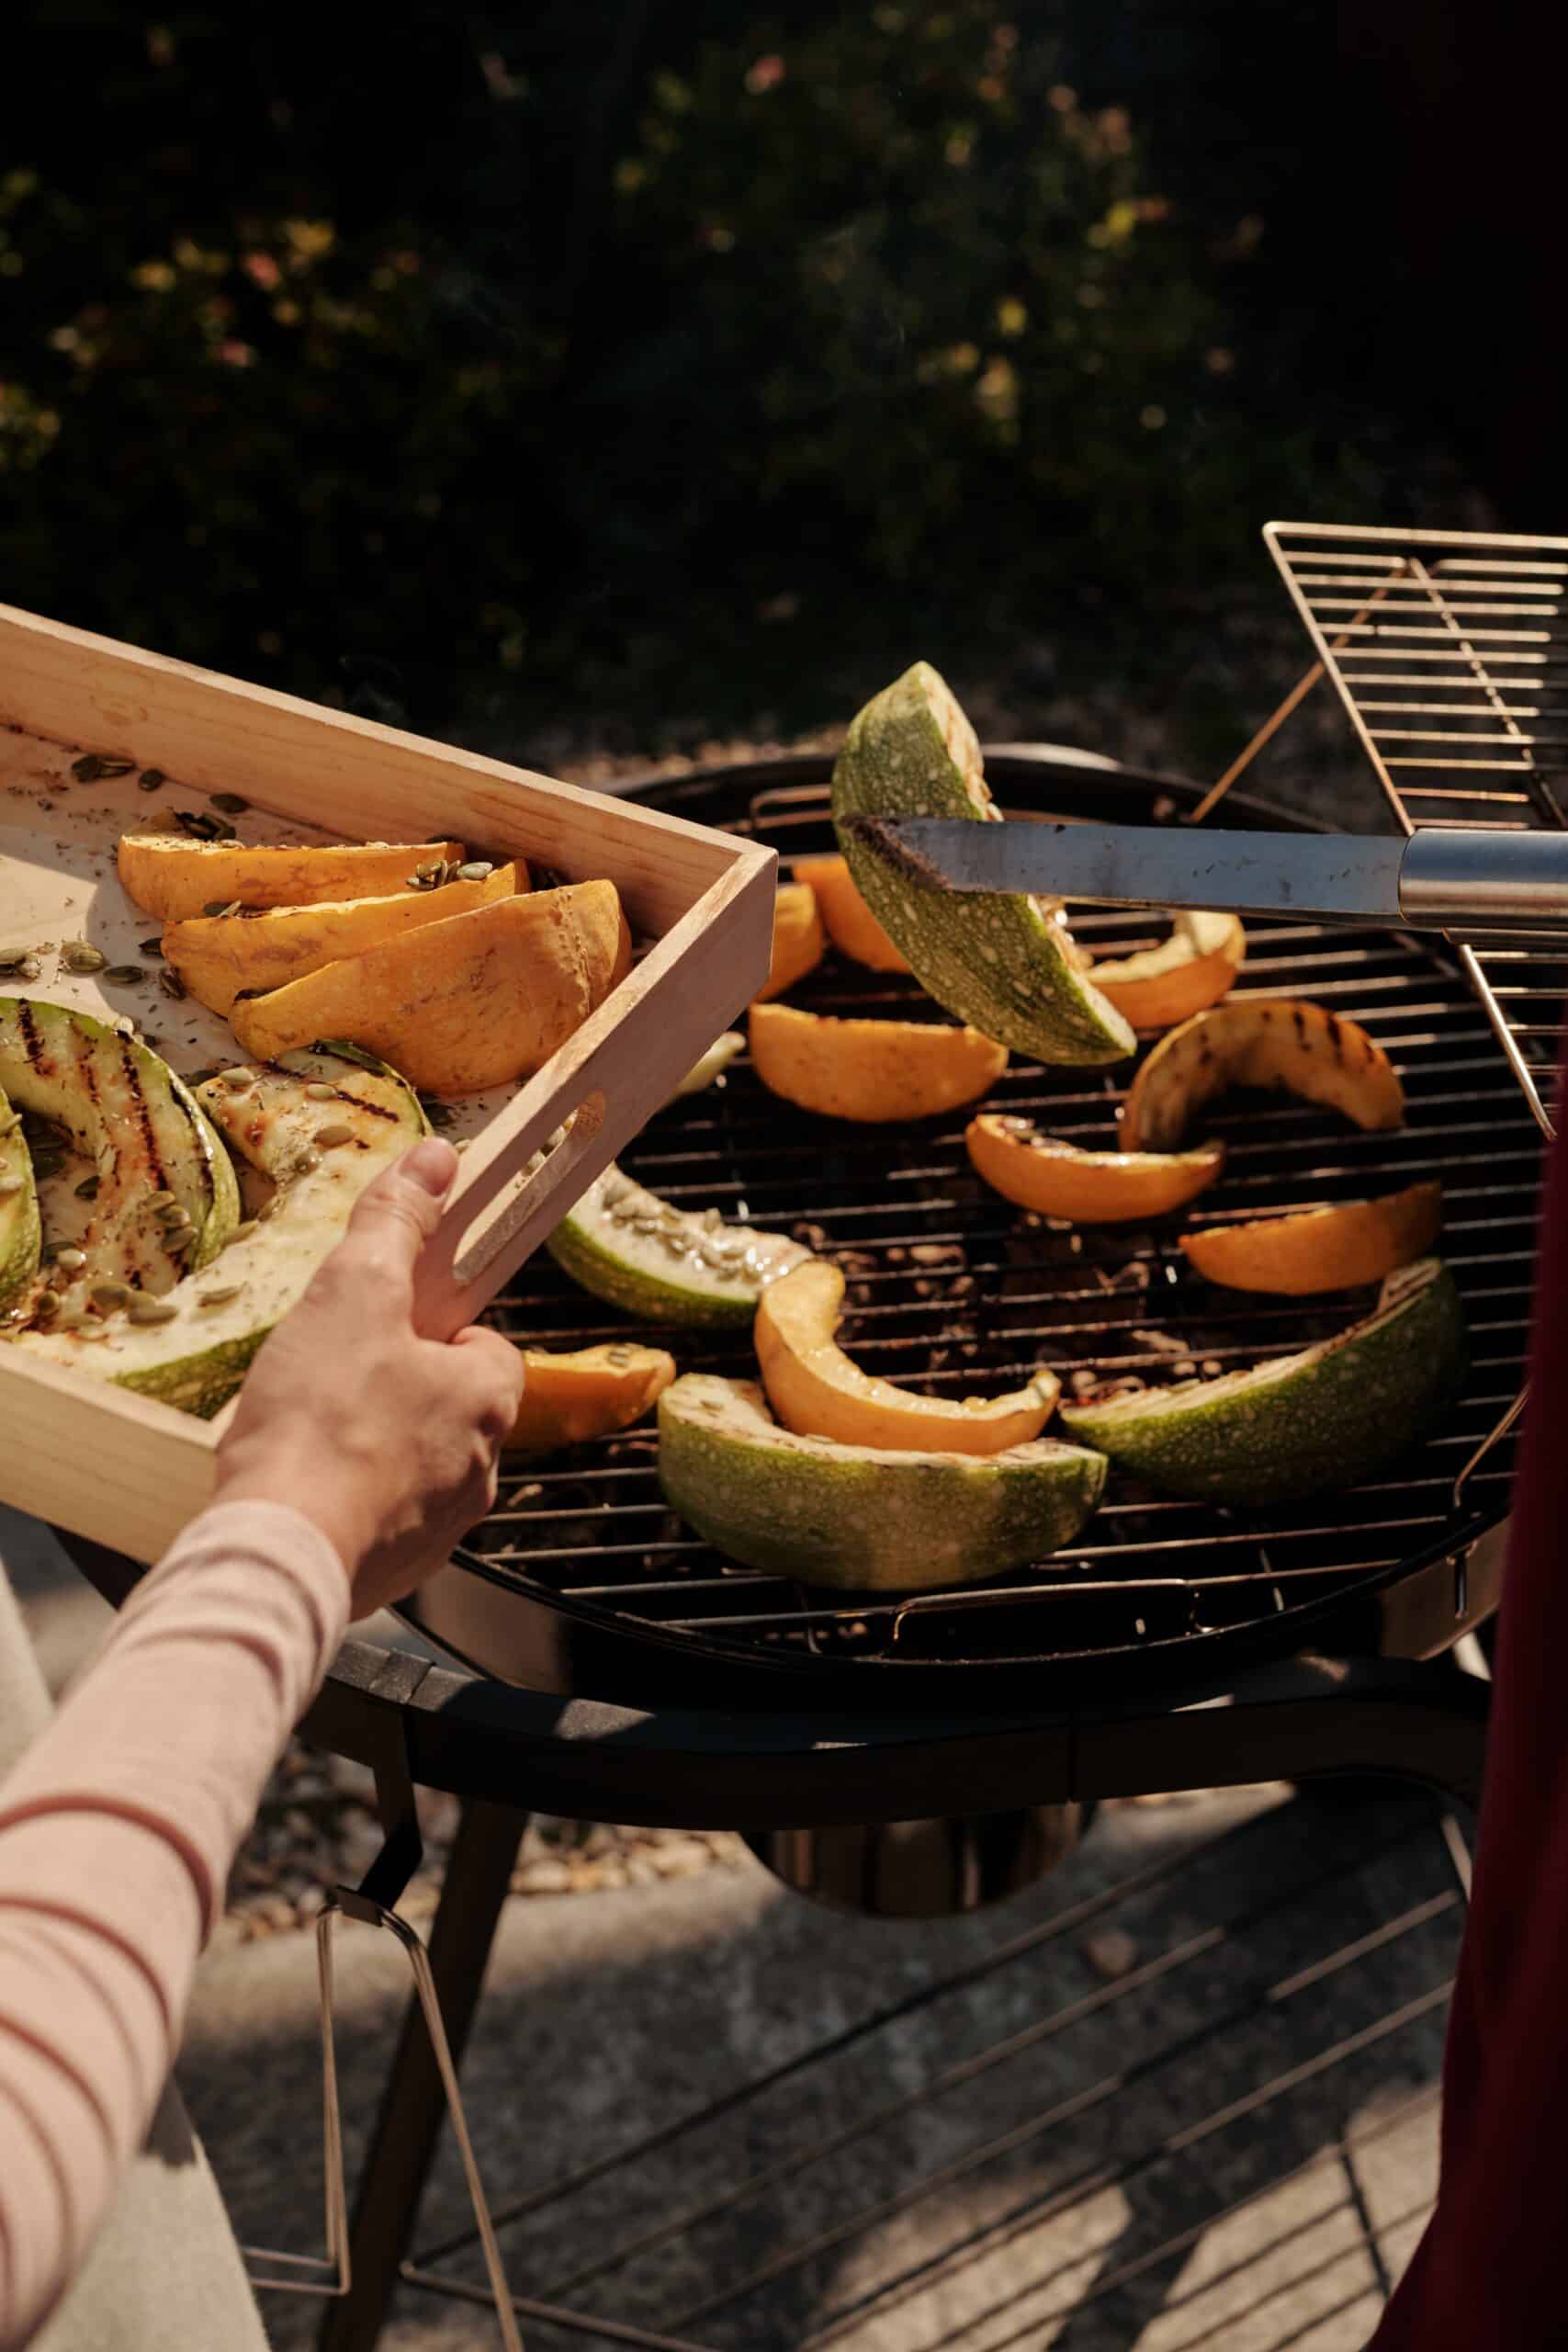 Grill Fruits and vegetables how to tips